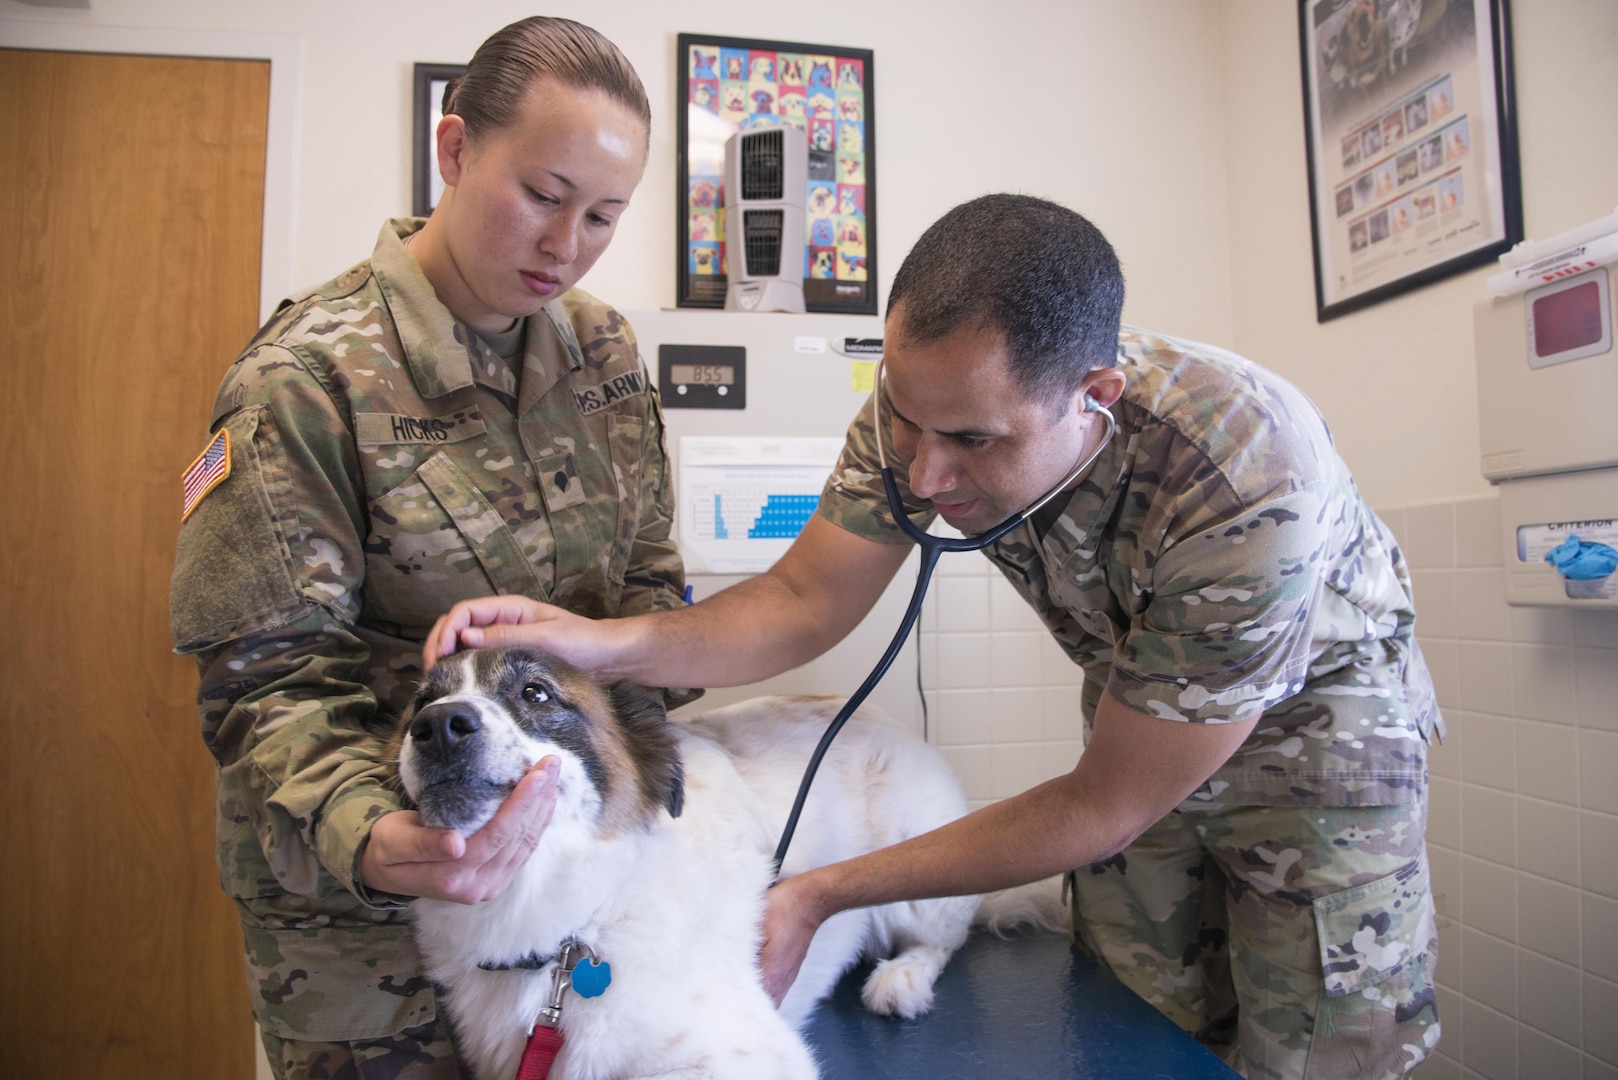 U.S. Army Capt. William Baskerville (right), 959th Clinical Support Squadron veterinarian, assesses Rocco as Spec. Sarah Hicks, veterinary technician, holds him during an appointment Sept. 9, 2016 at the Joint Base San Antonio-Randolph veterinary clinic. Veterinary treatment facilities at JBSA-Fort Sam Houston, JBSA-Lackland and JBSA-Randolph provide services to keep animals healthy and to prevent or treat sickness and diseases early on.